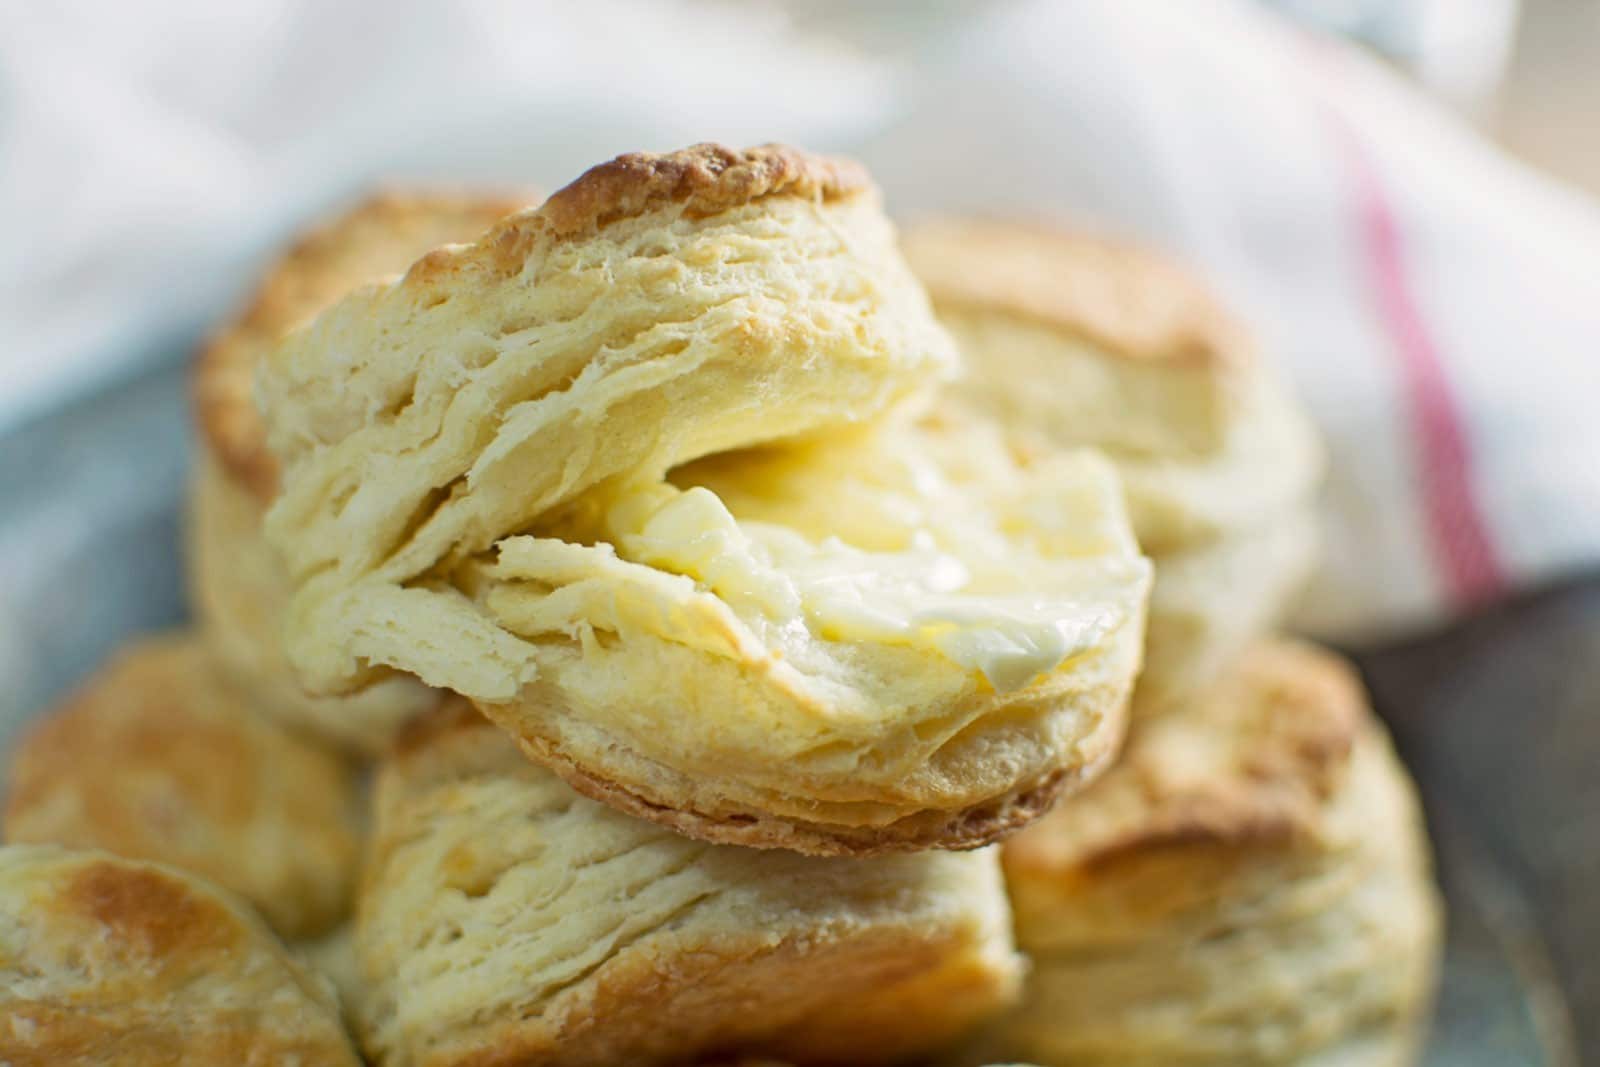 Easy to make, buttery and flaky, Southern Biscuits! Recipe @LittleFiggyFood